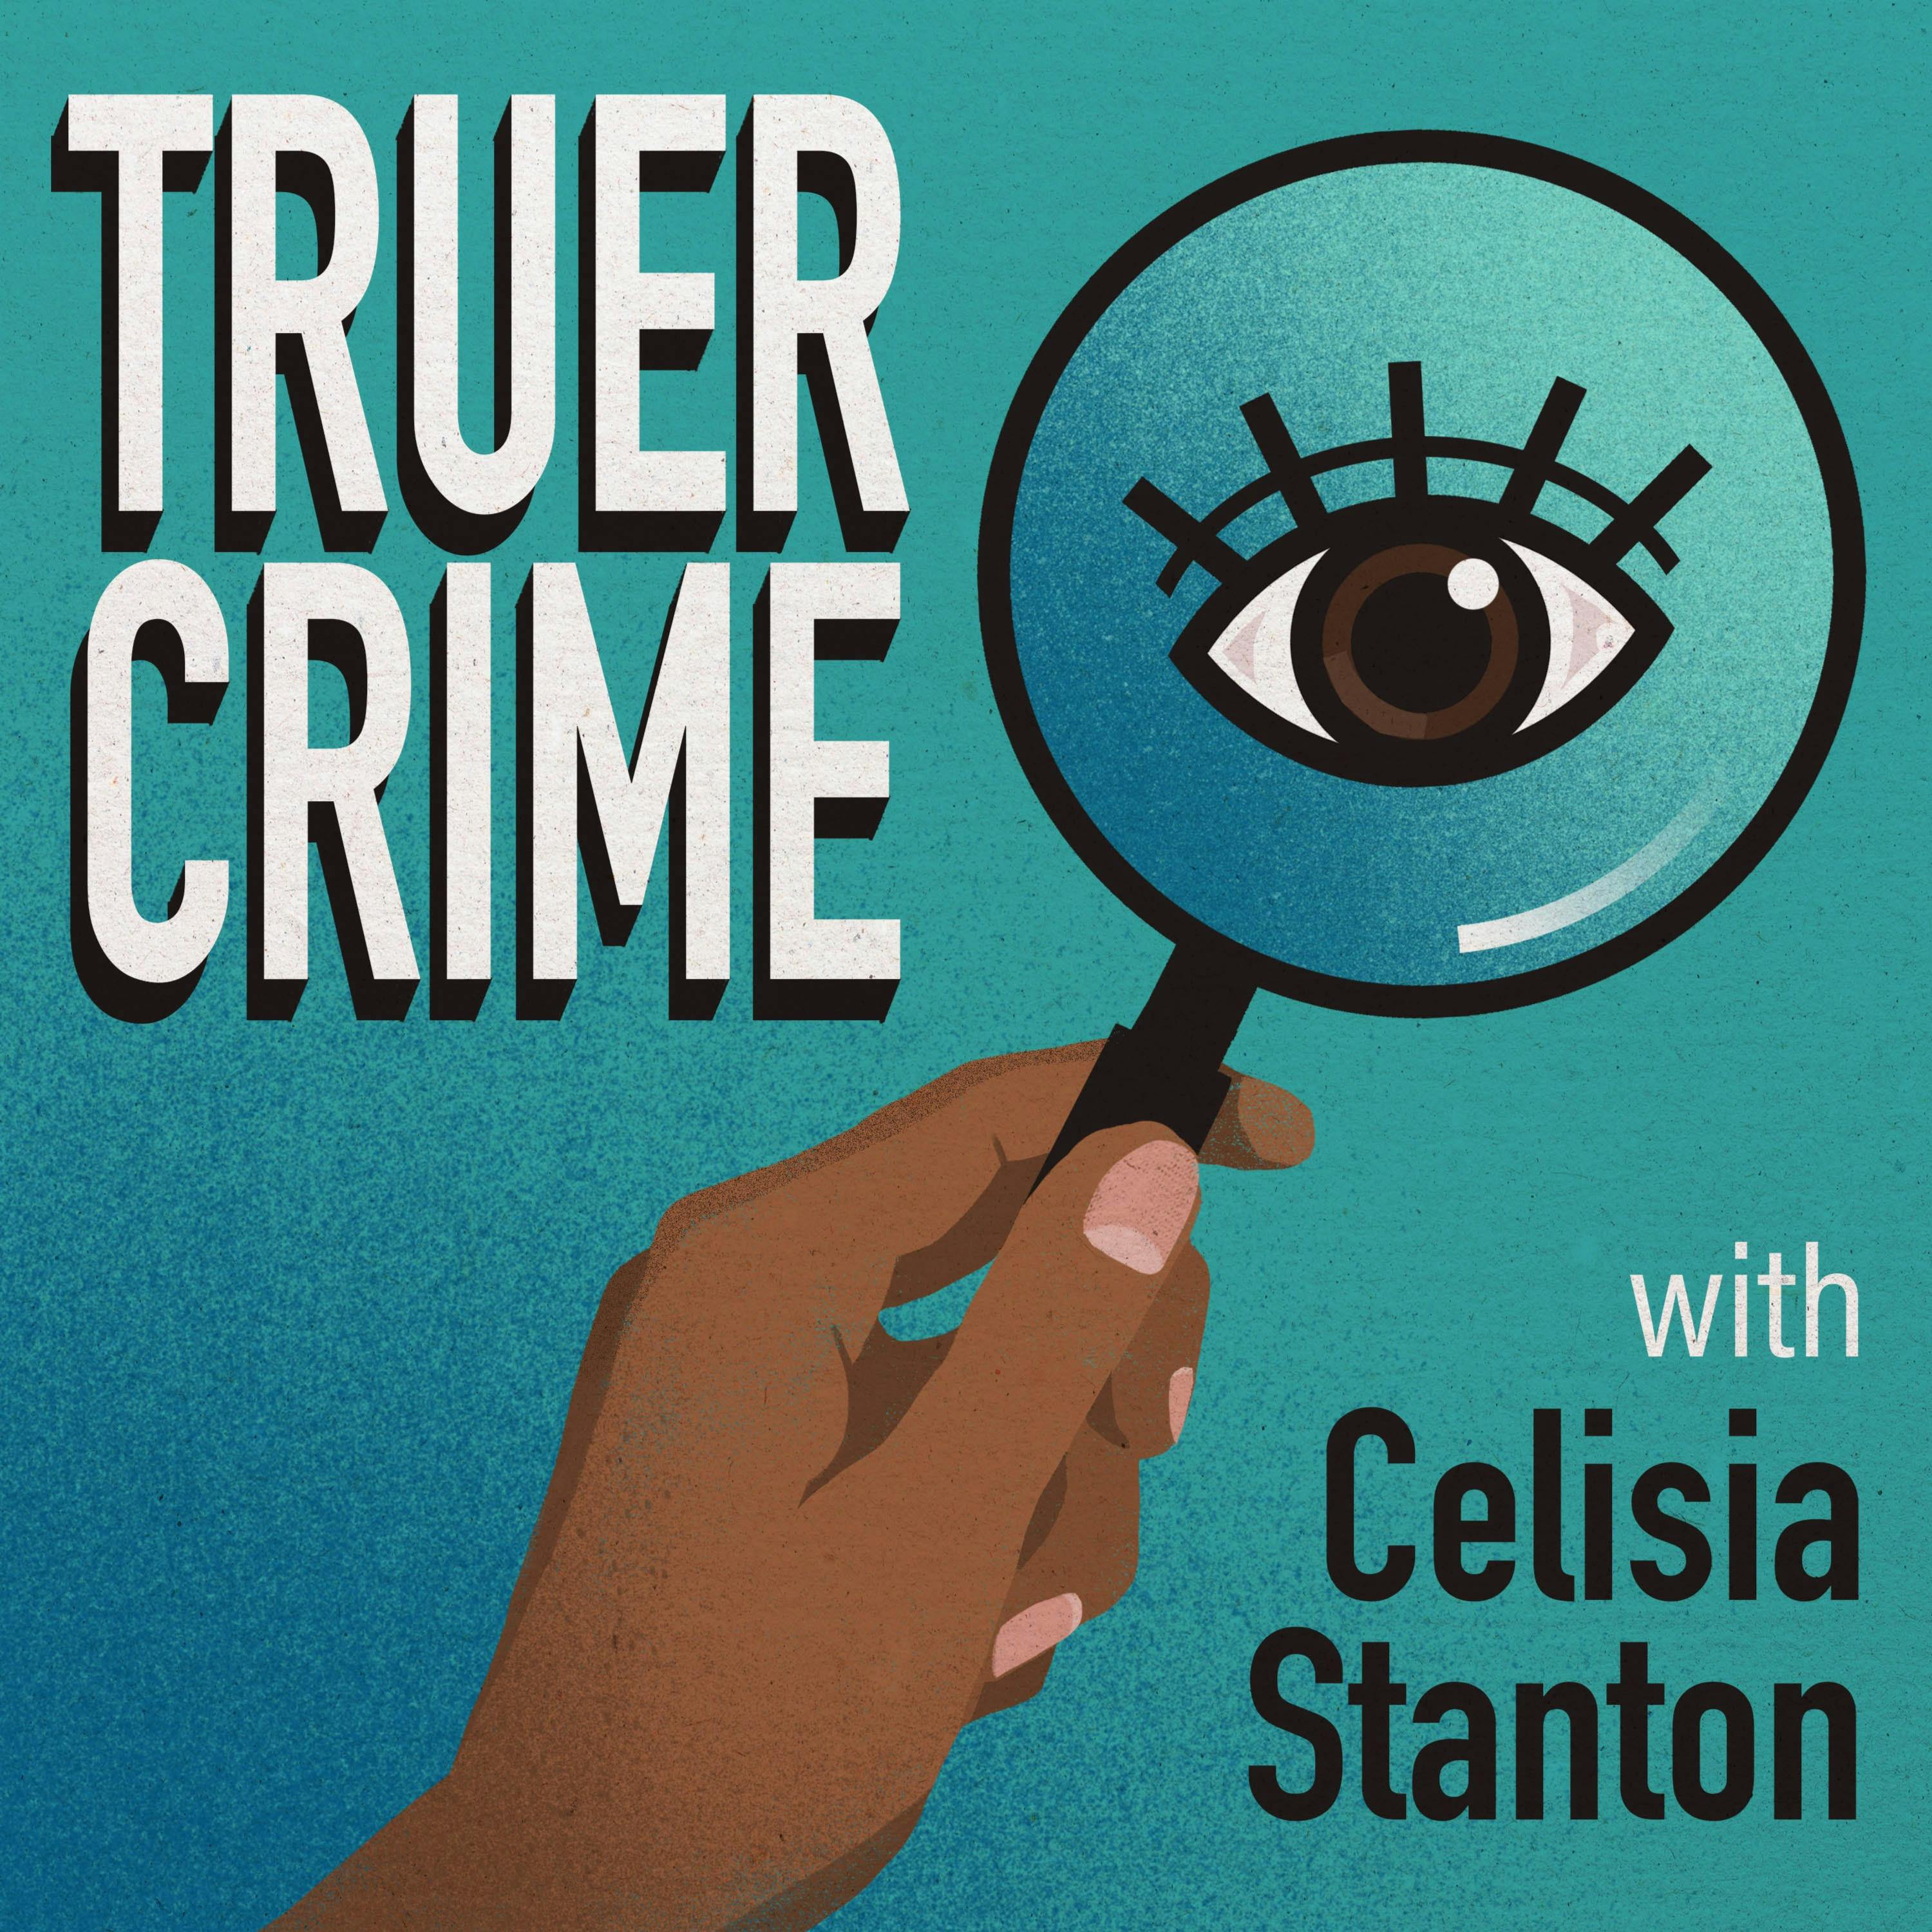 True Love Podcast - Listen, Reviews, Charts - Chartable